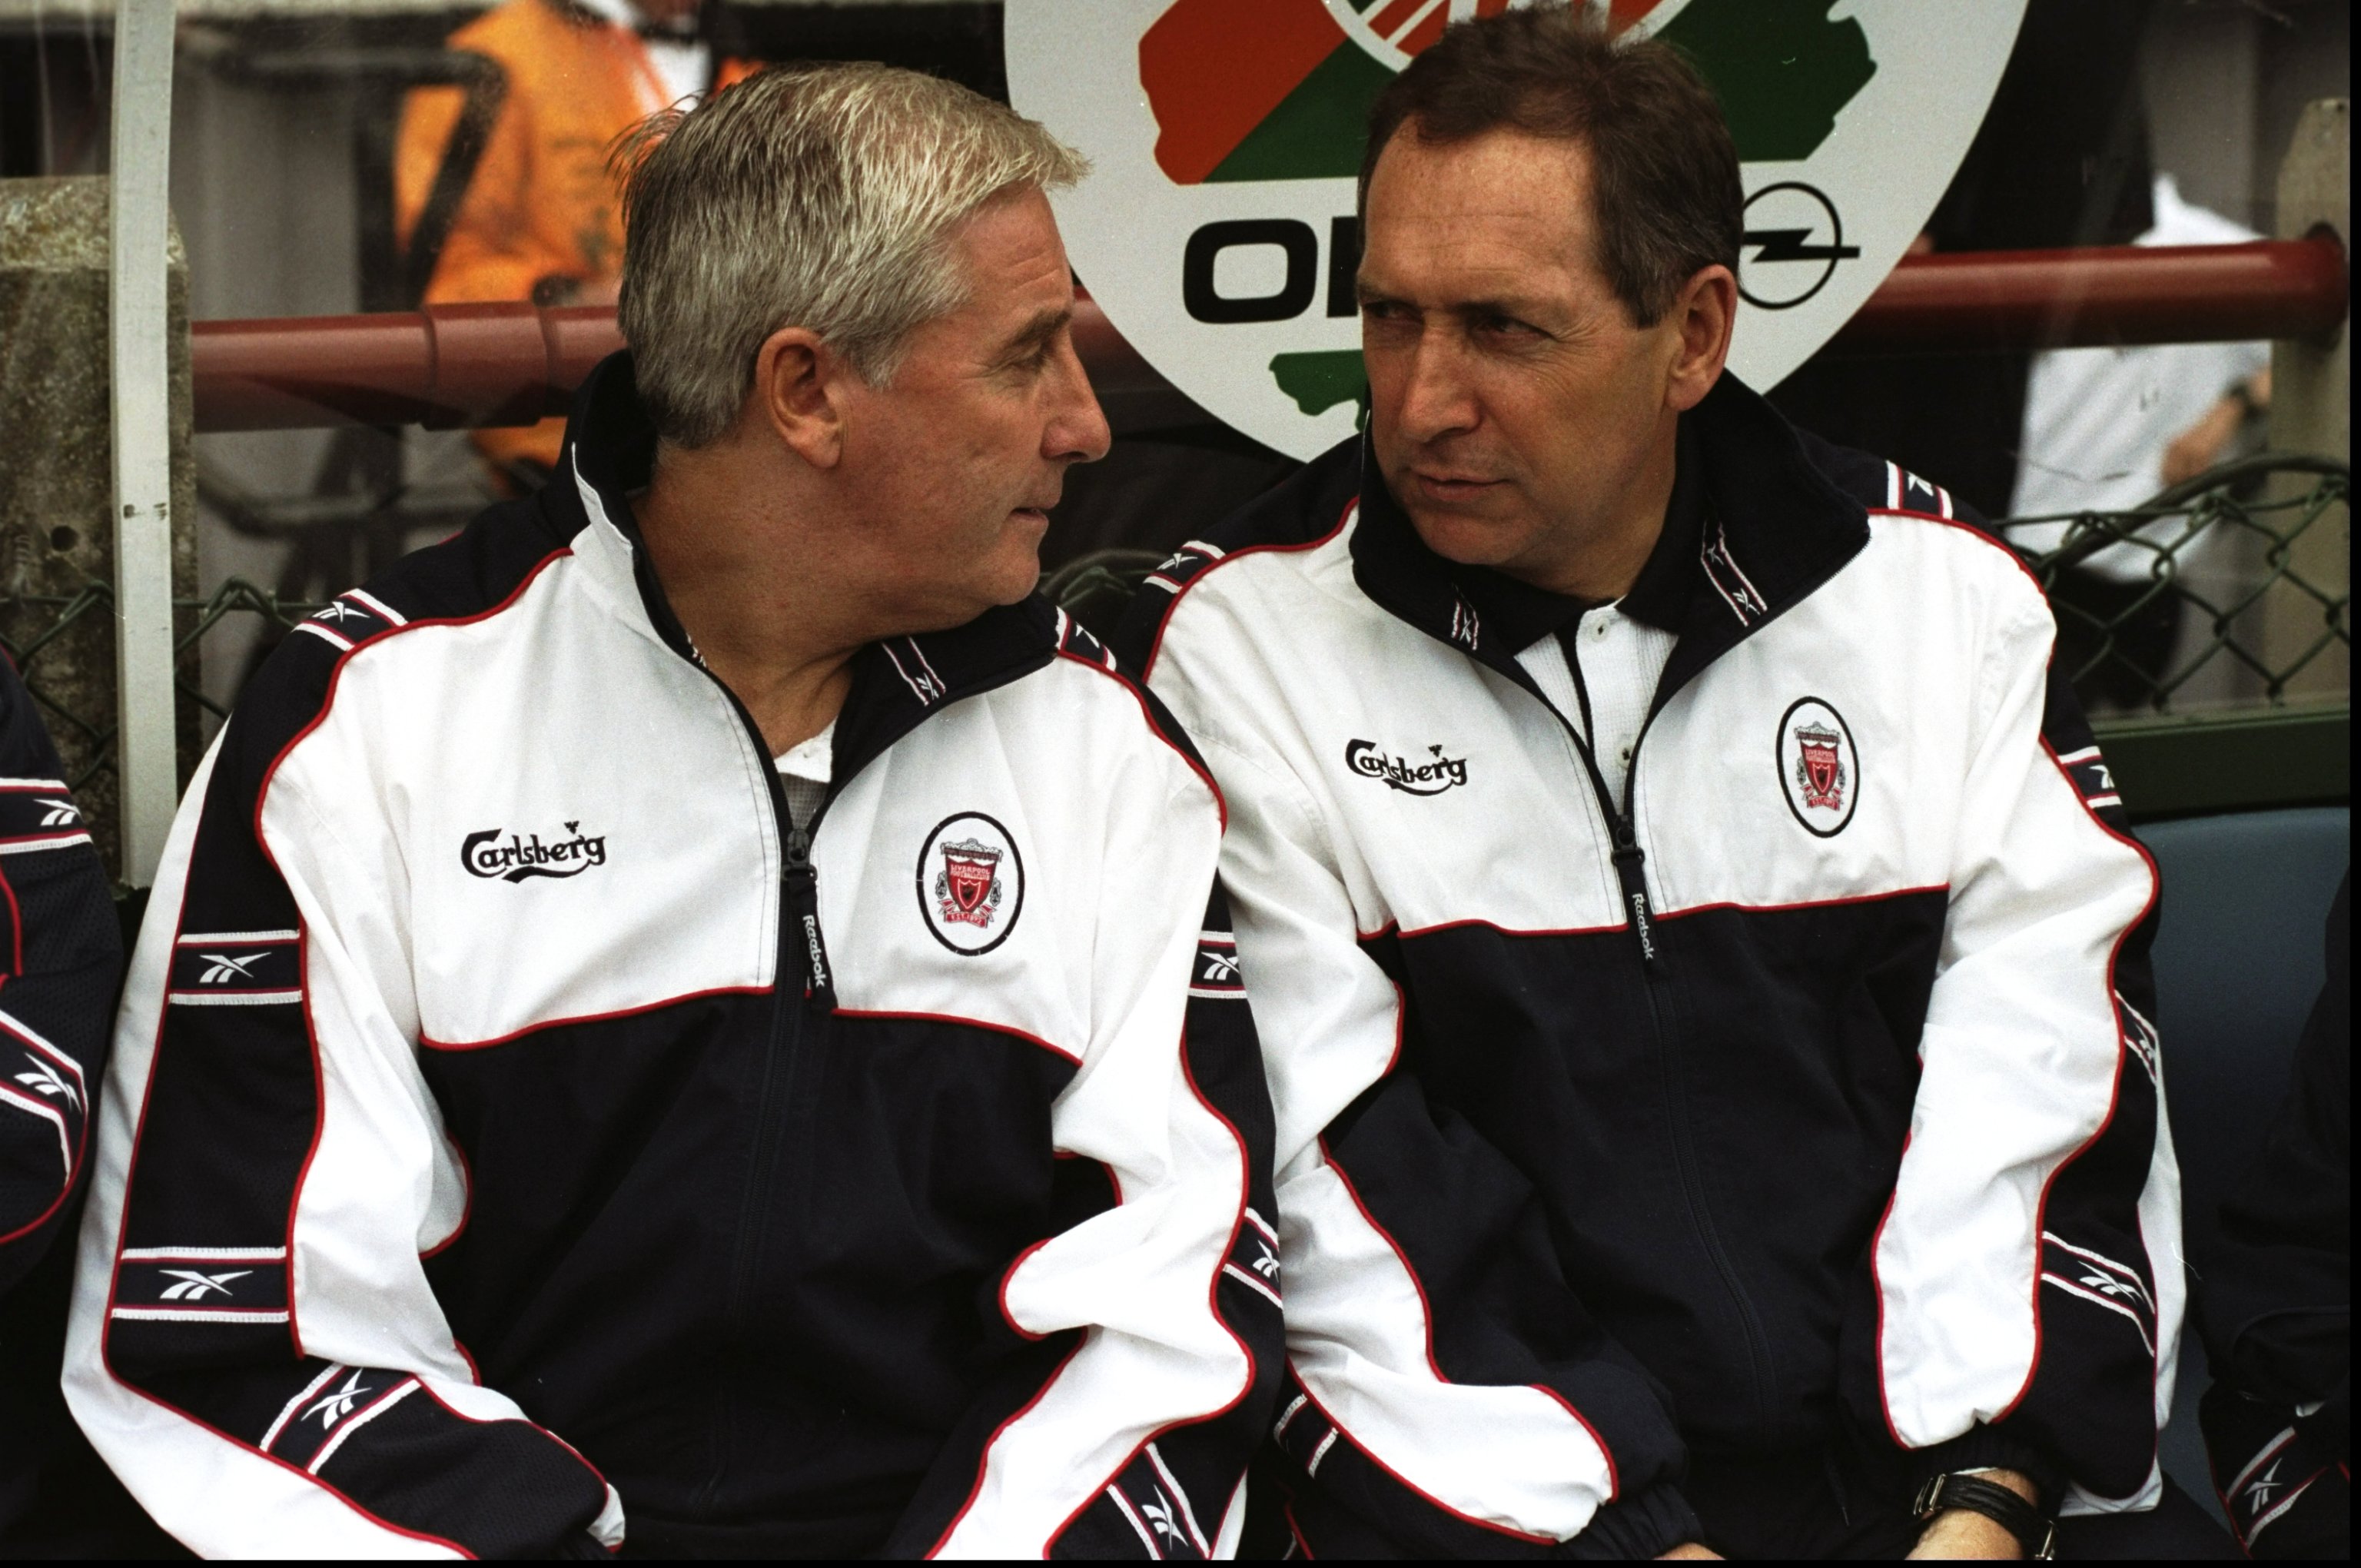 1 Aug 1998:  The Liverpool management team of Roy Evans and Gerard Houllier chat on the bench during the pre-season tournament match against Leeds United in Dublin, Republic of Ireland. Liverpool won the match 2-0. \ Mandatory Credit: Clive  Brunskill/All